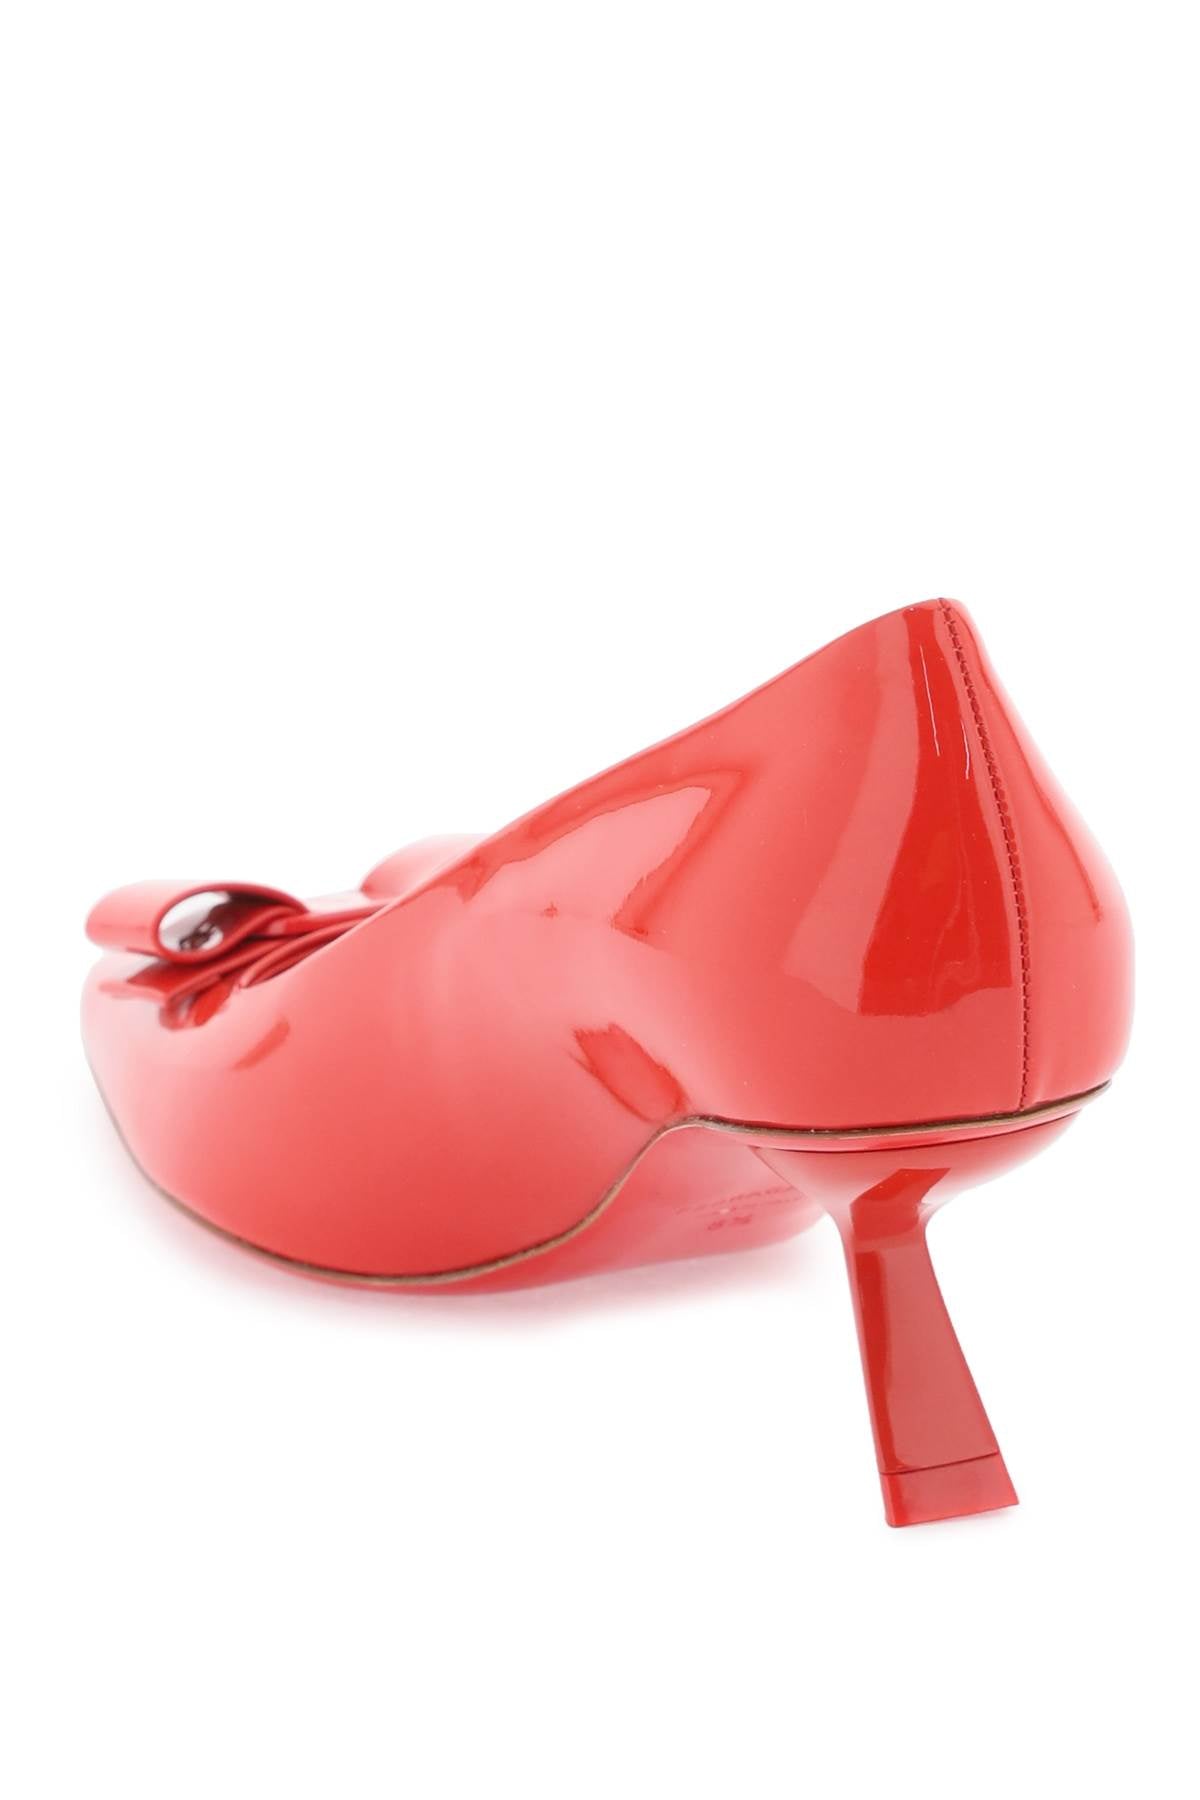 FERRAGAMO Sophisticated Red Patent Leather Heels with Iconic Vara Bow - Women's Fashion Pumps